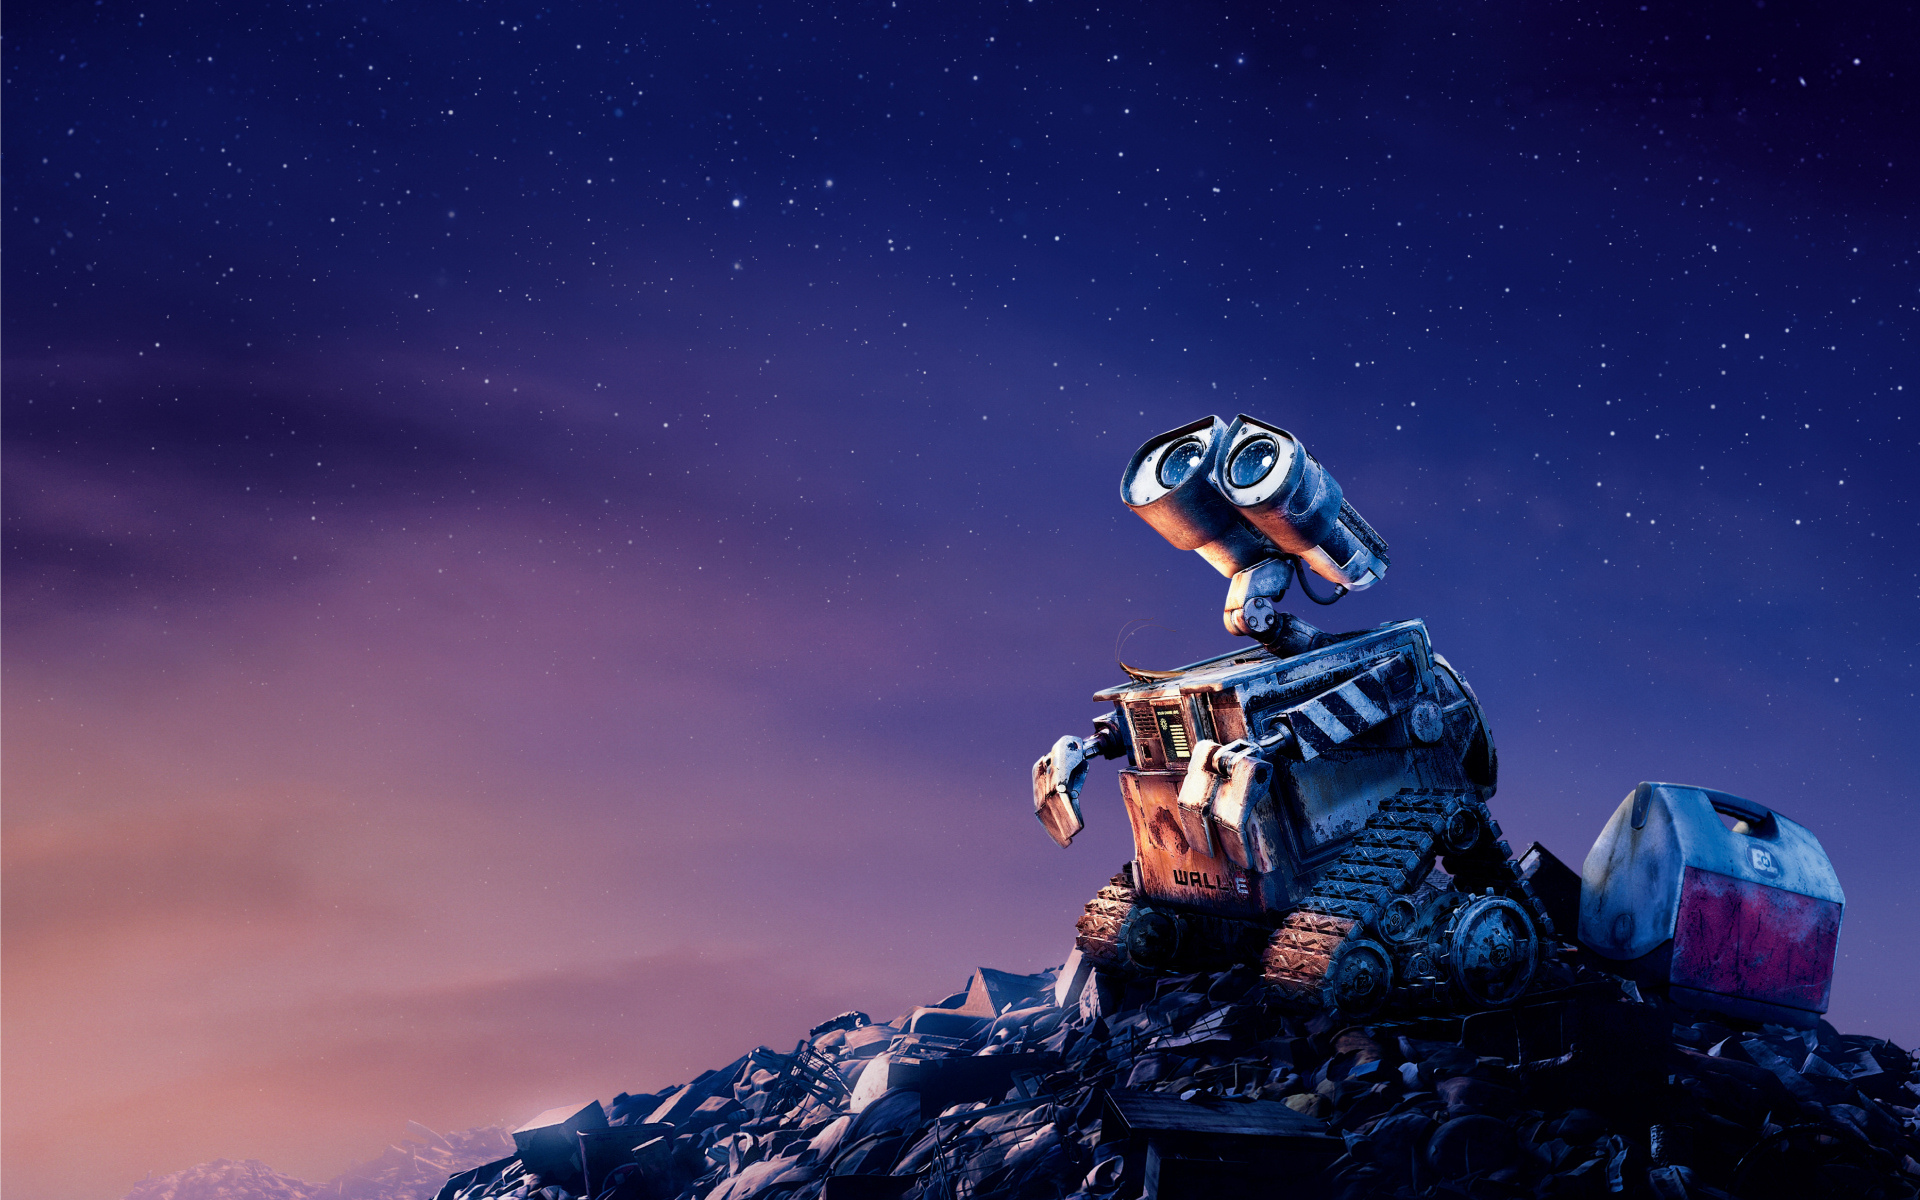  Wall·e HD Android Wallpapers